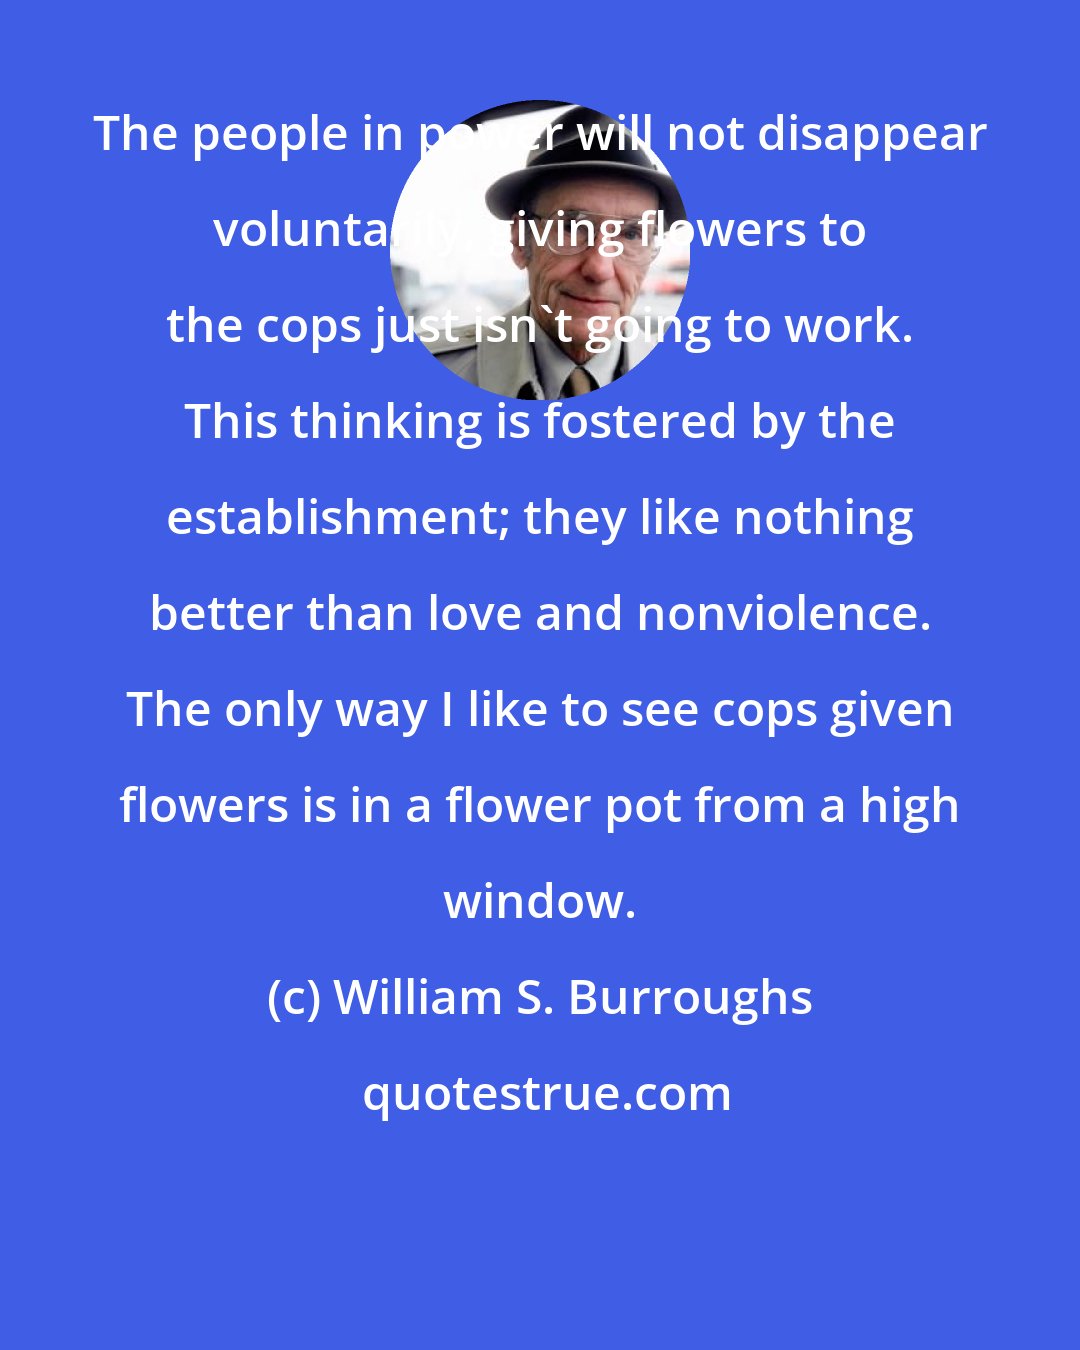 William S. Burroughs: The people in power will not disappear voluntarily, giving flowers to the cops just isn't going to work. This thinking is fostered by the establishment; they like nothing better than love and nonviolence. The only way I like to see cops given flowers is in a flower pot from a high window.